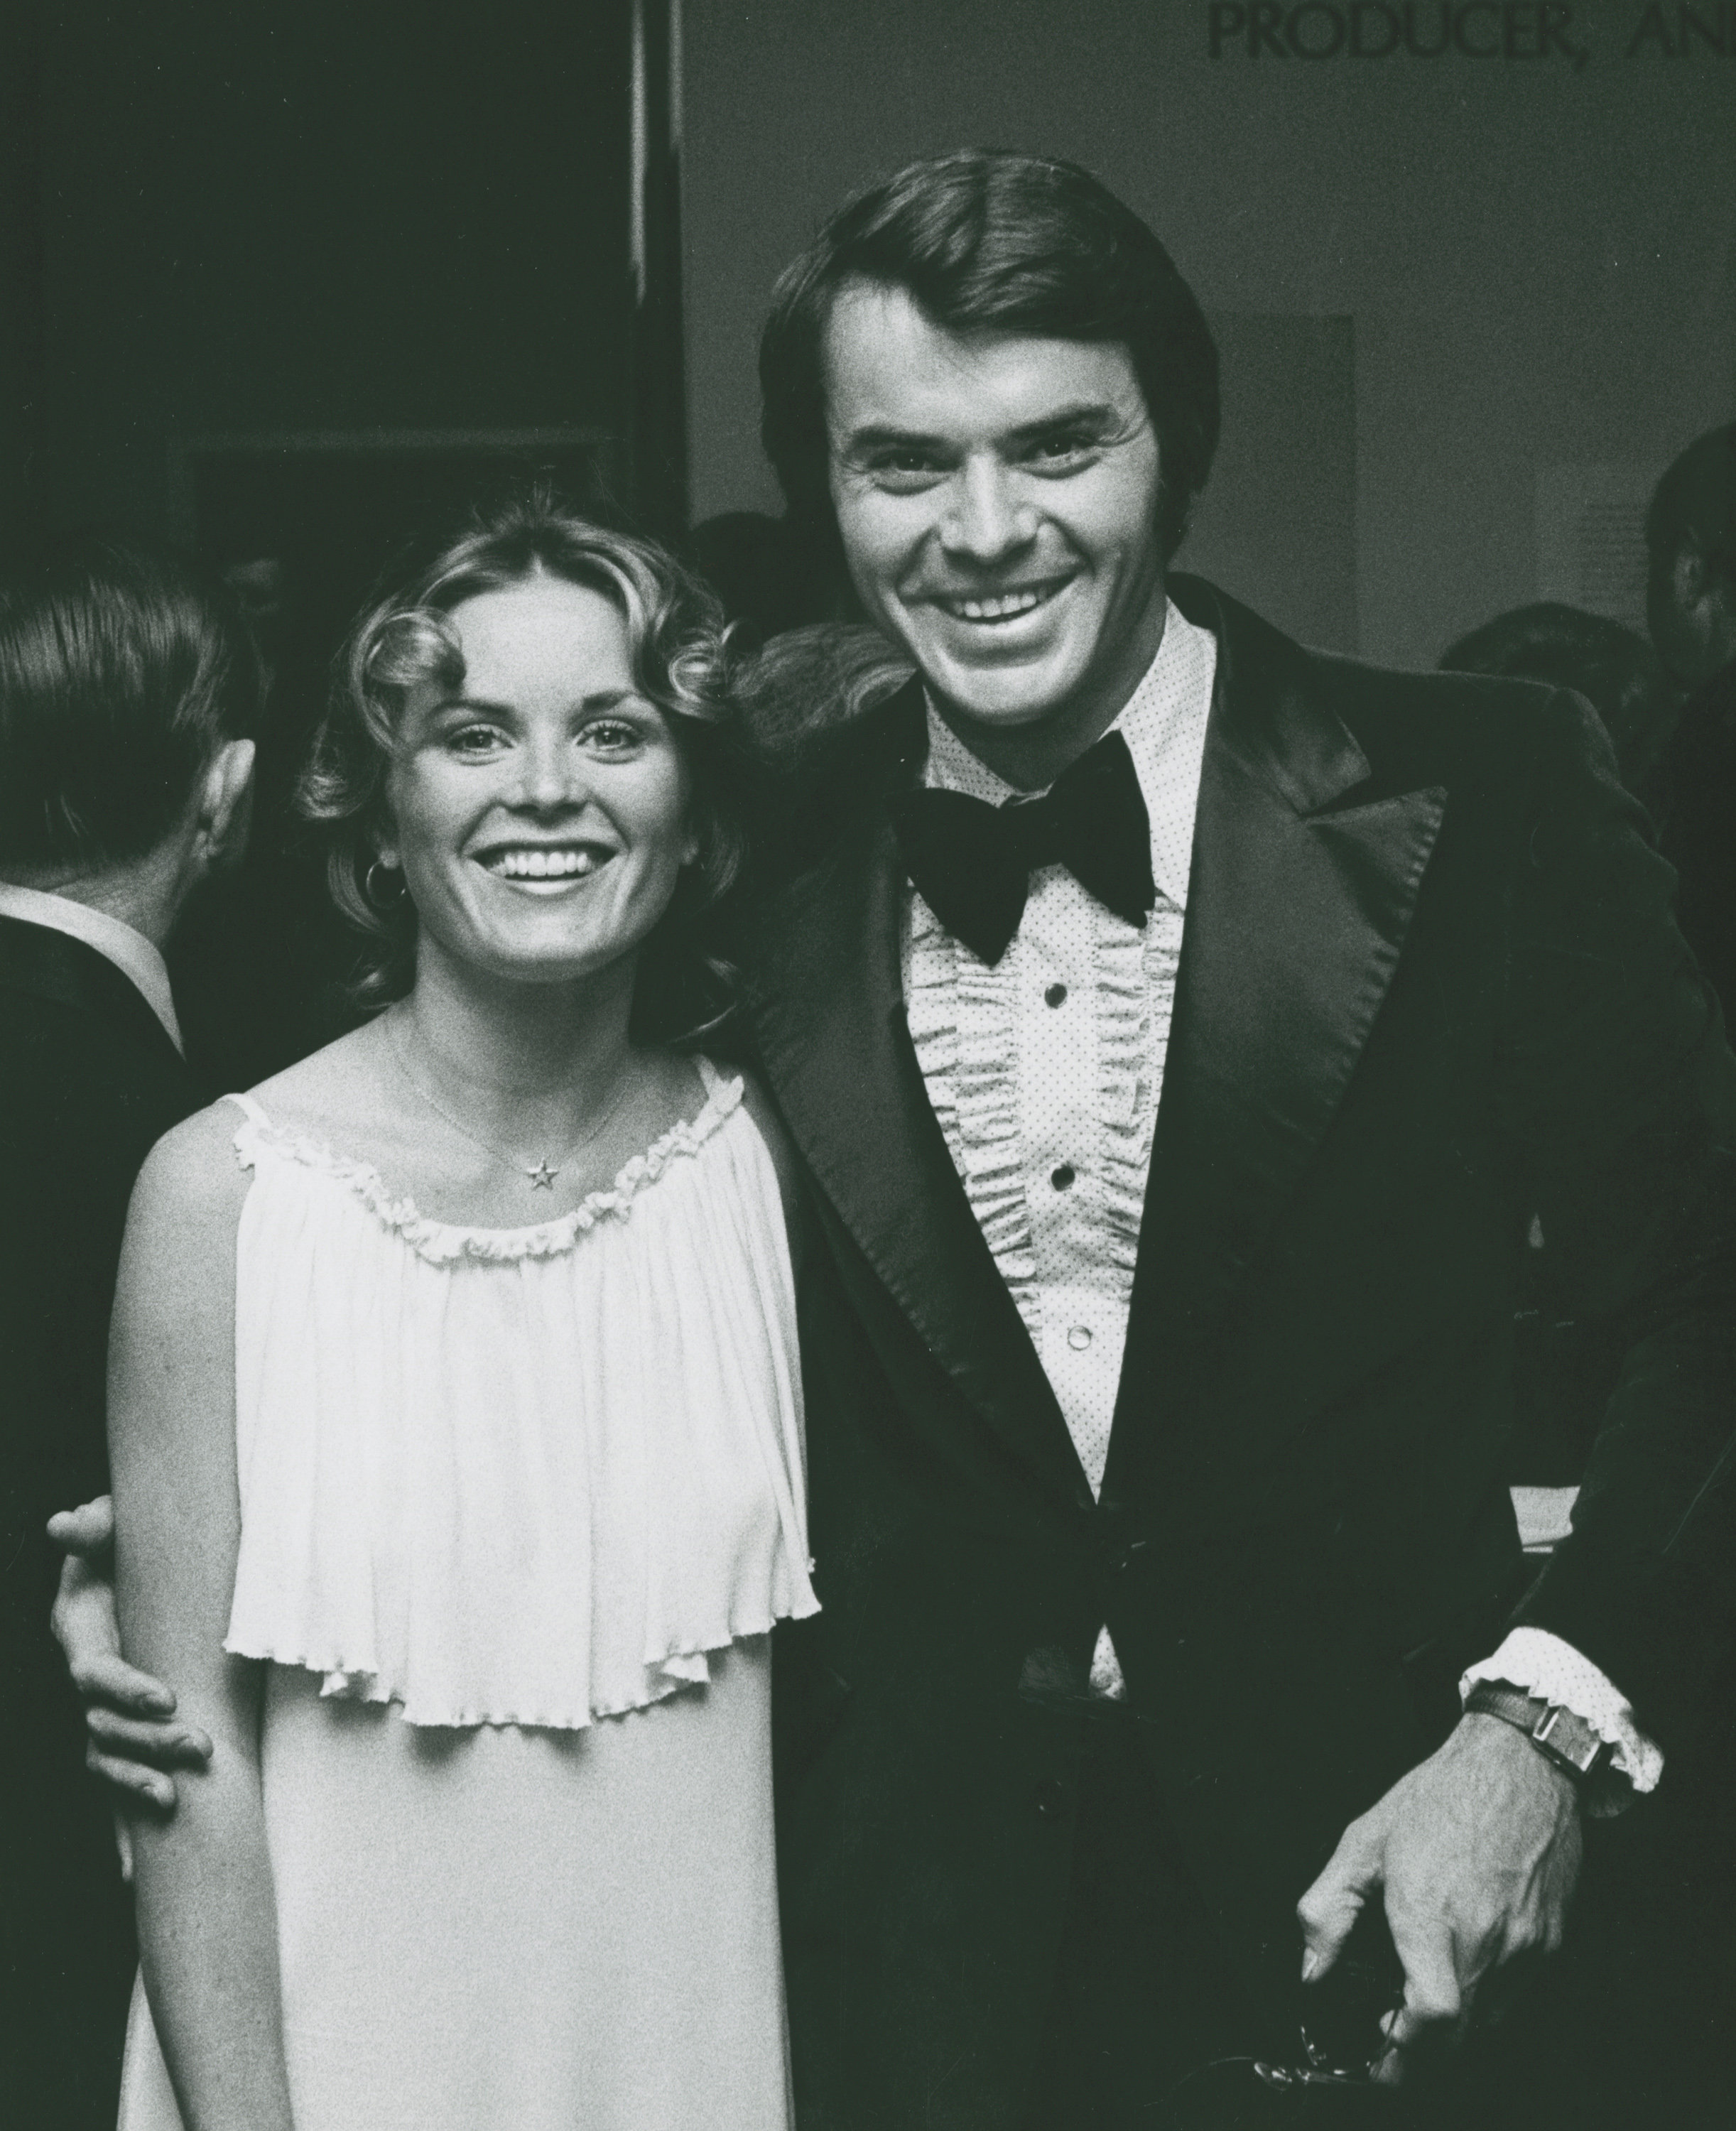 Heather Menzies and Robert Urich at the screening of "Robin and Marian" on March 26, 1976, in Beverly Hills, California | Source: Getty Images